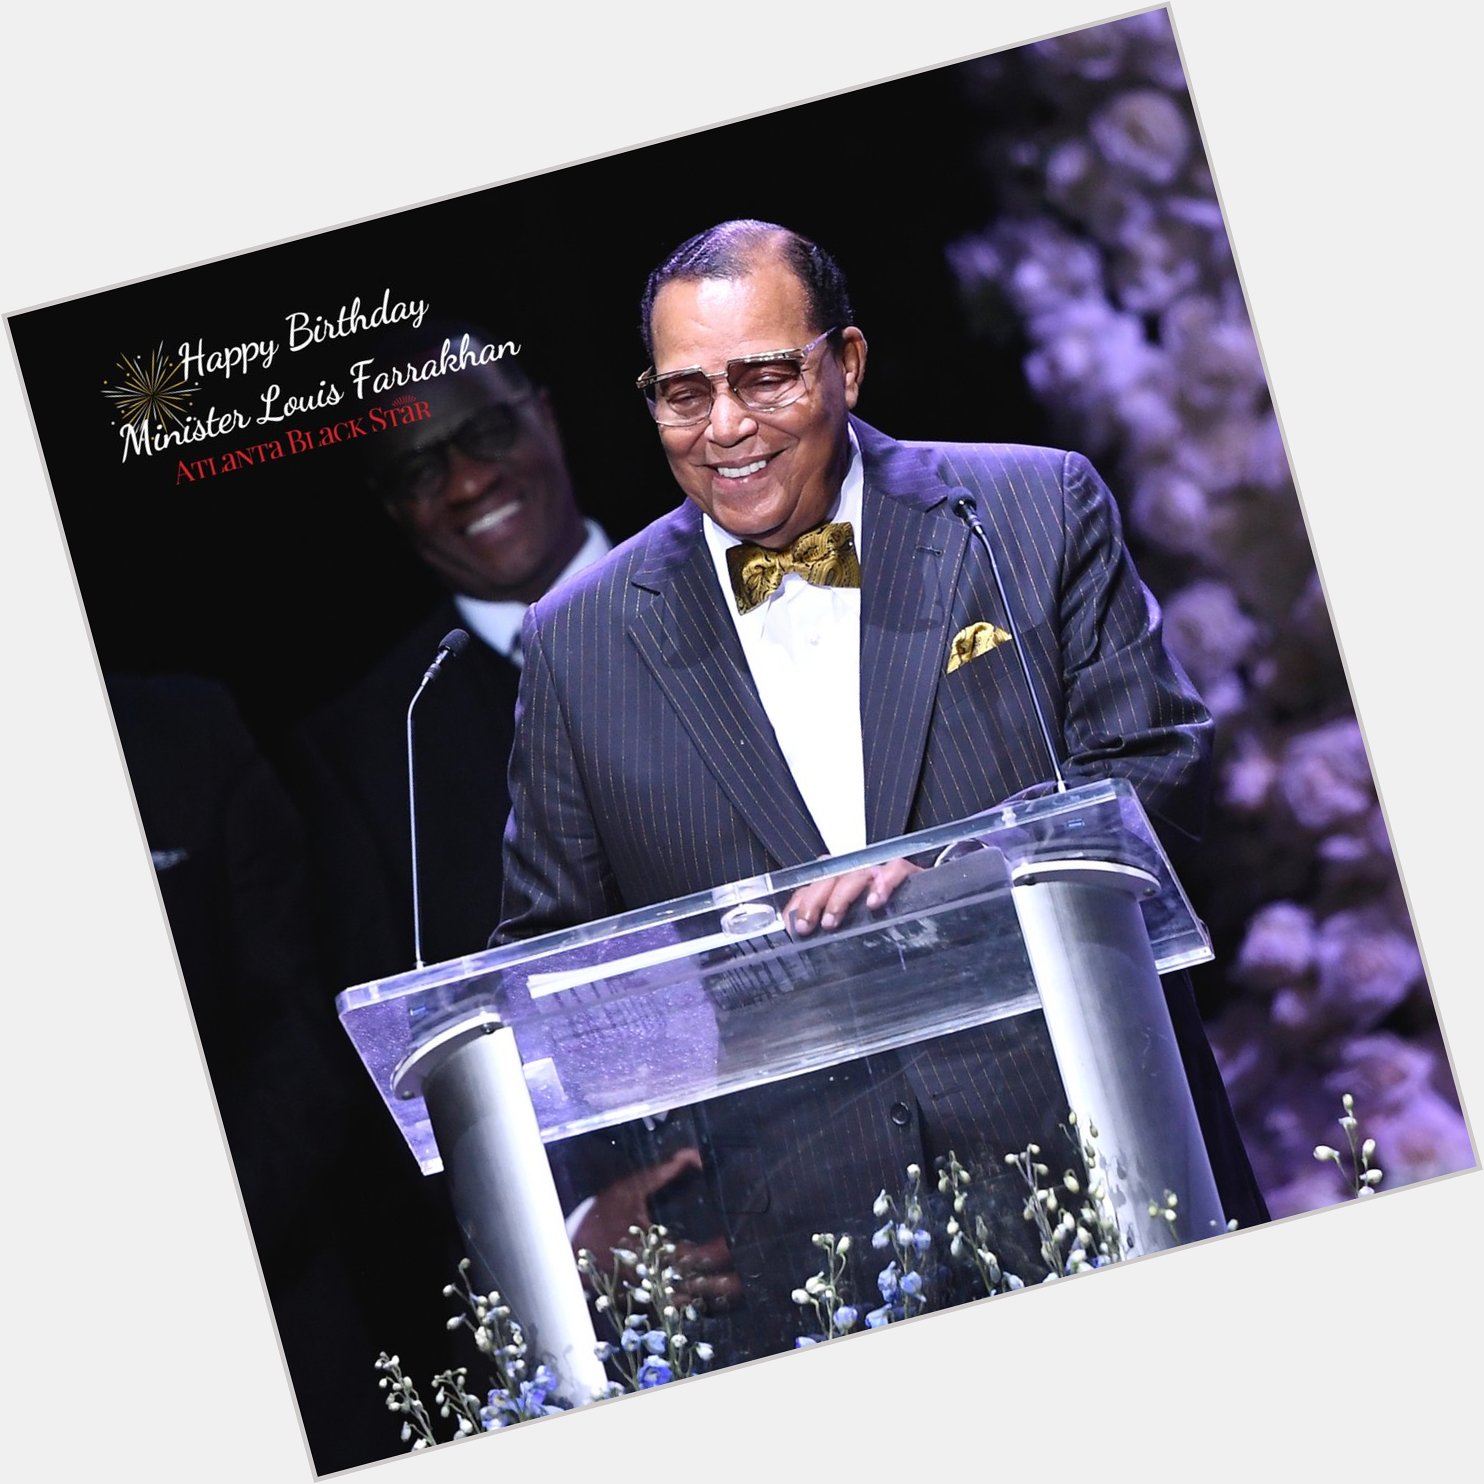 Happy Belated 88th Birthday to the honorable Minister Louis Farrakhan! Wishing you many more 